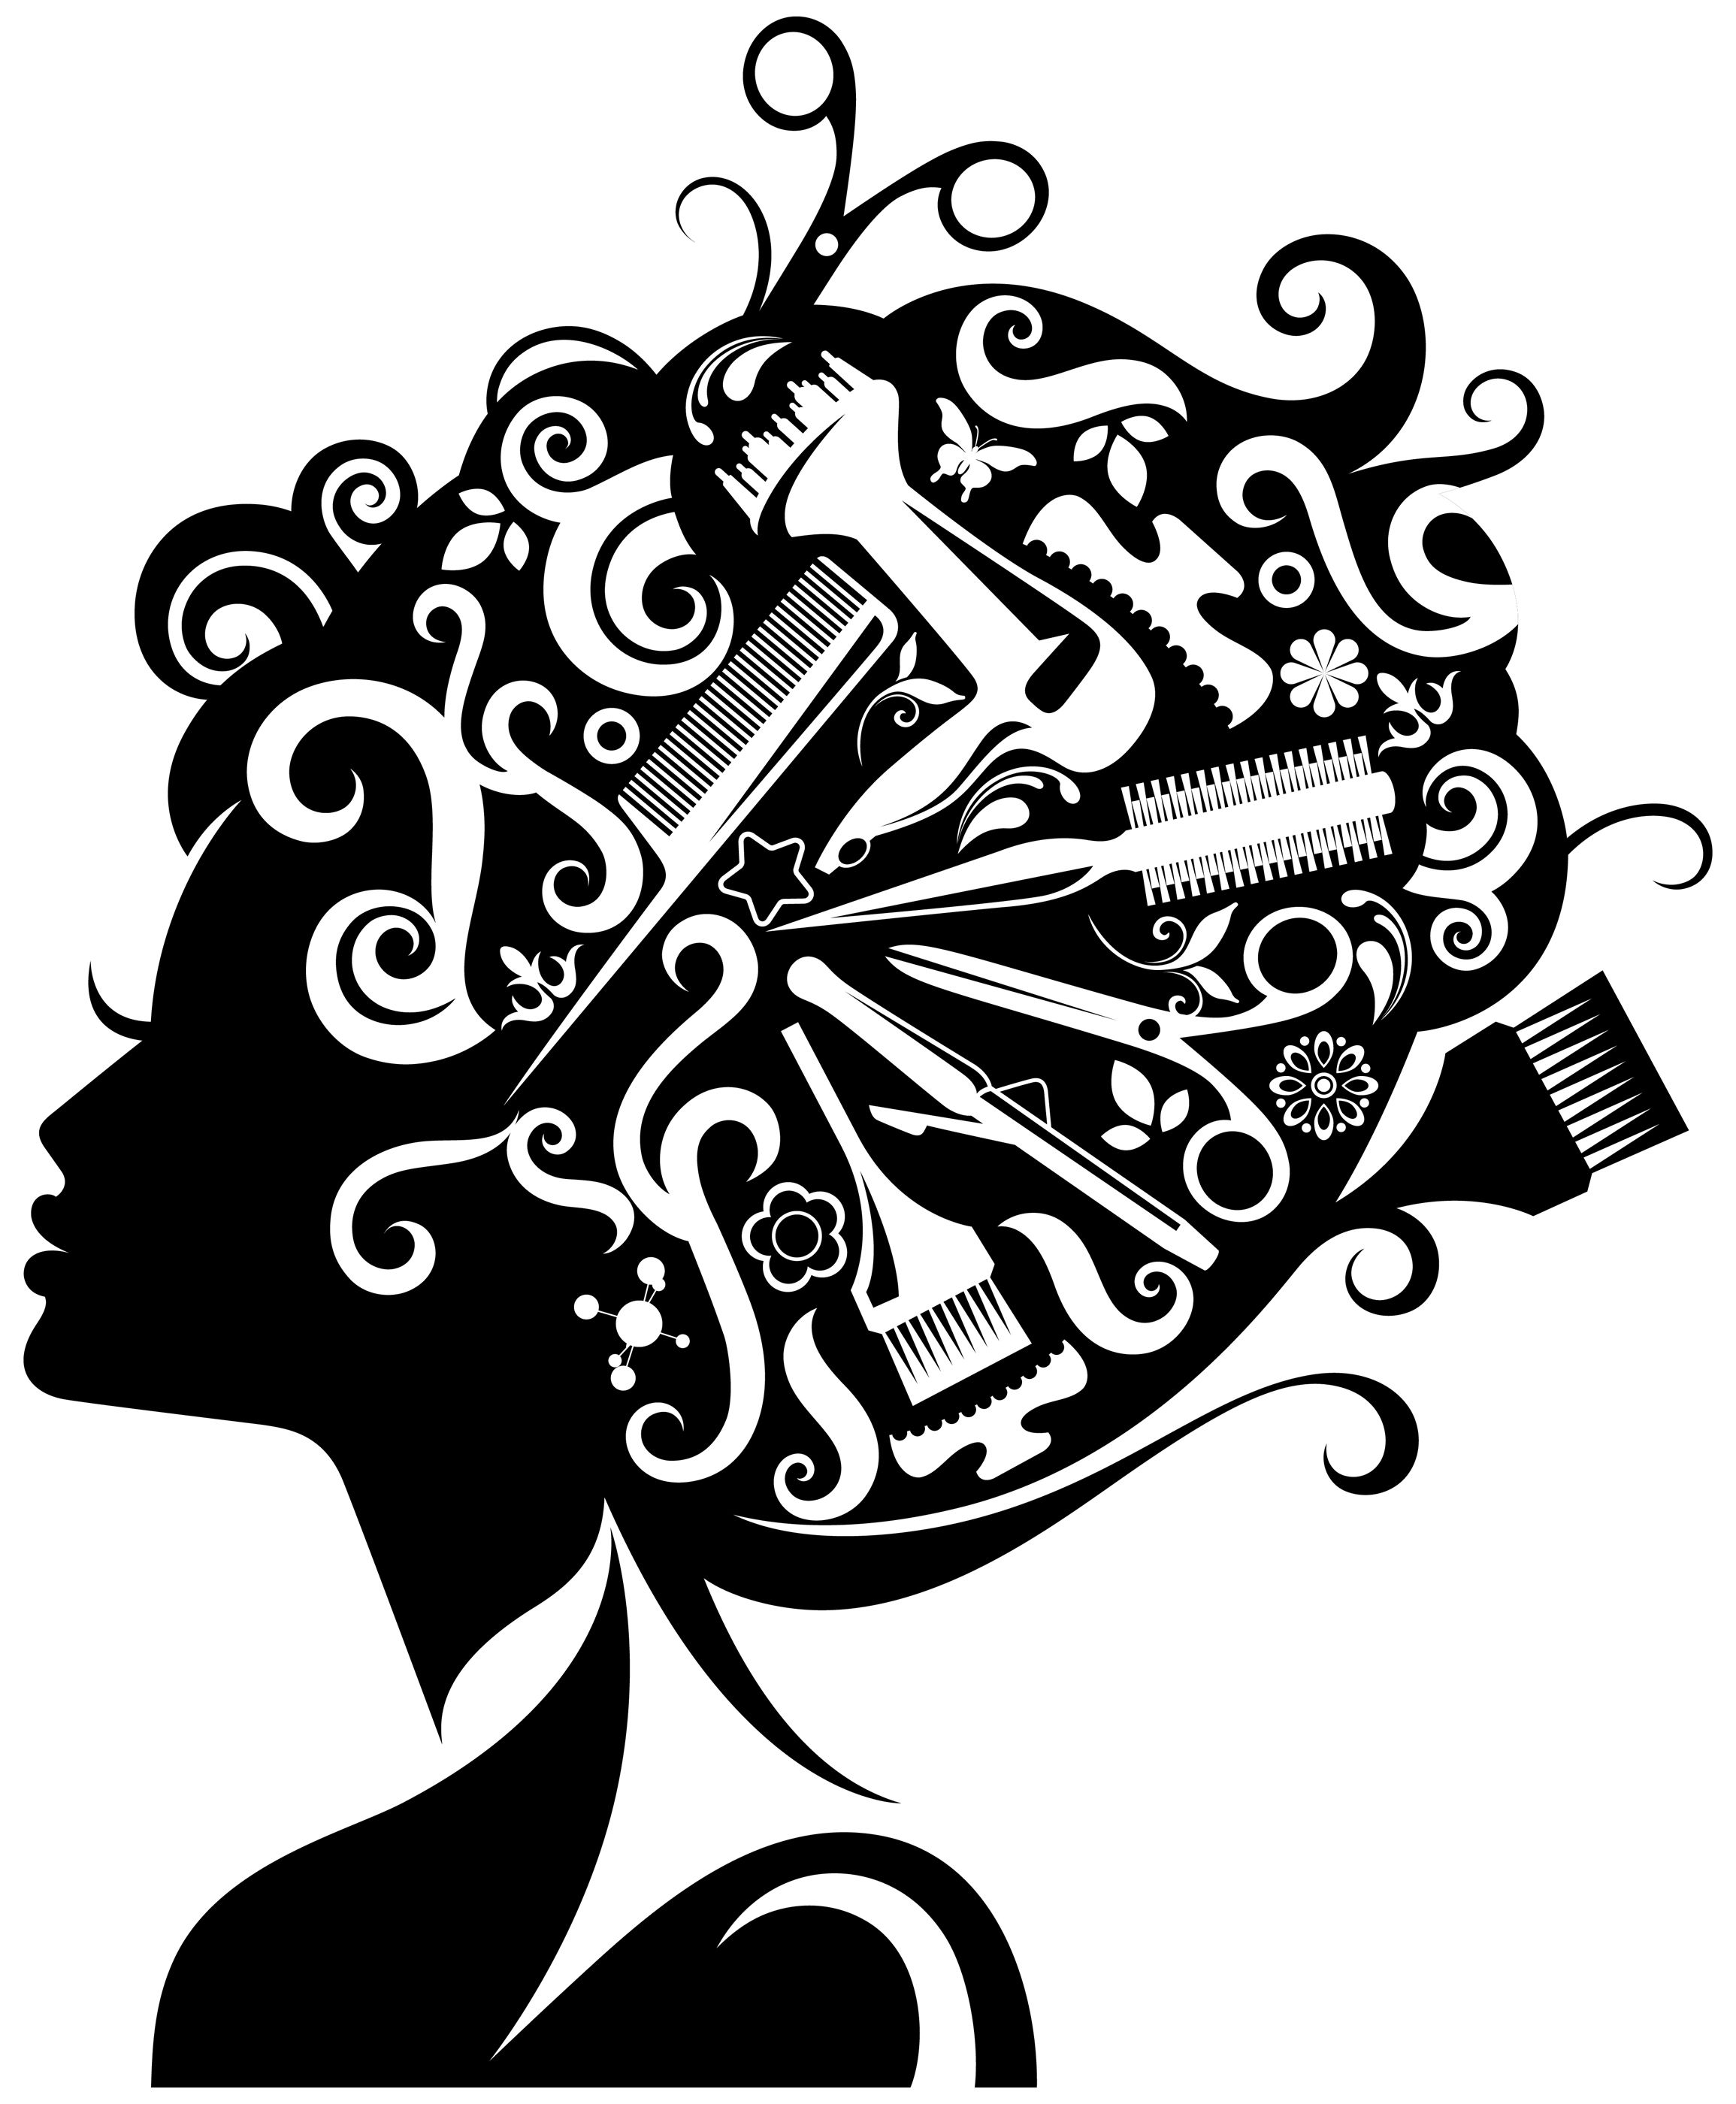 Career as a cosmetologist. Cosmetology clipart beauty shop